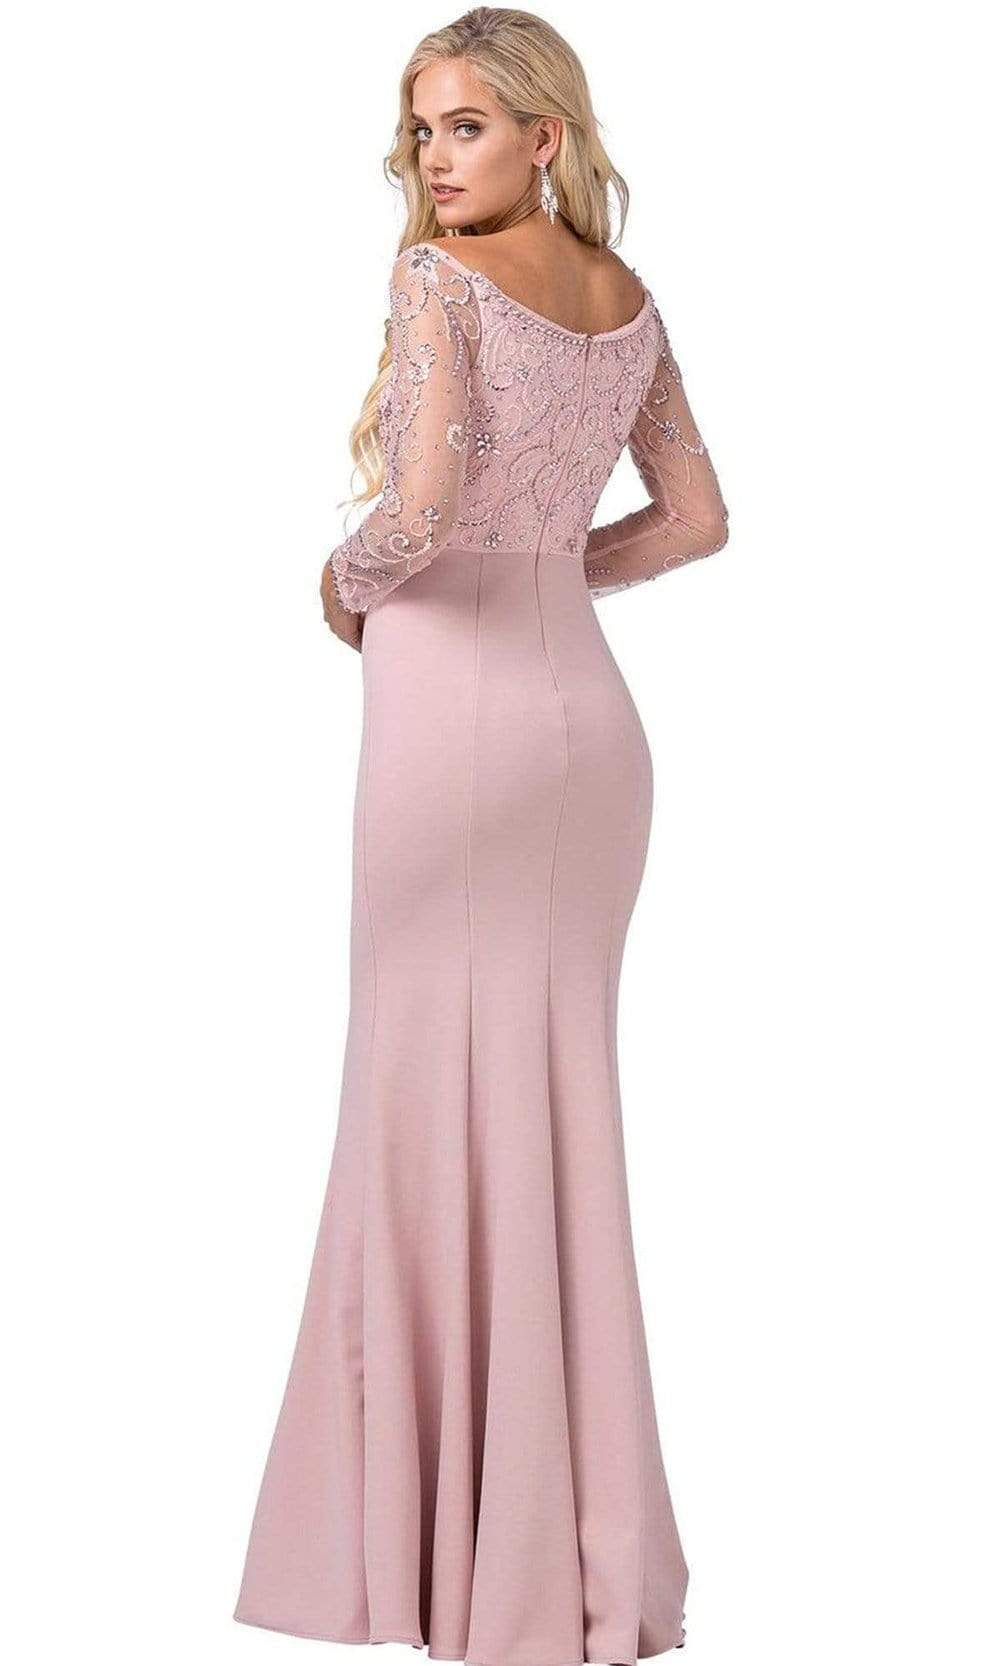 Dancing Queen - 2672 Embellished Long Sleeve Bateau Sheath Gown Special Occasion Dress